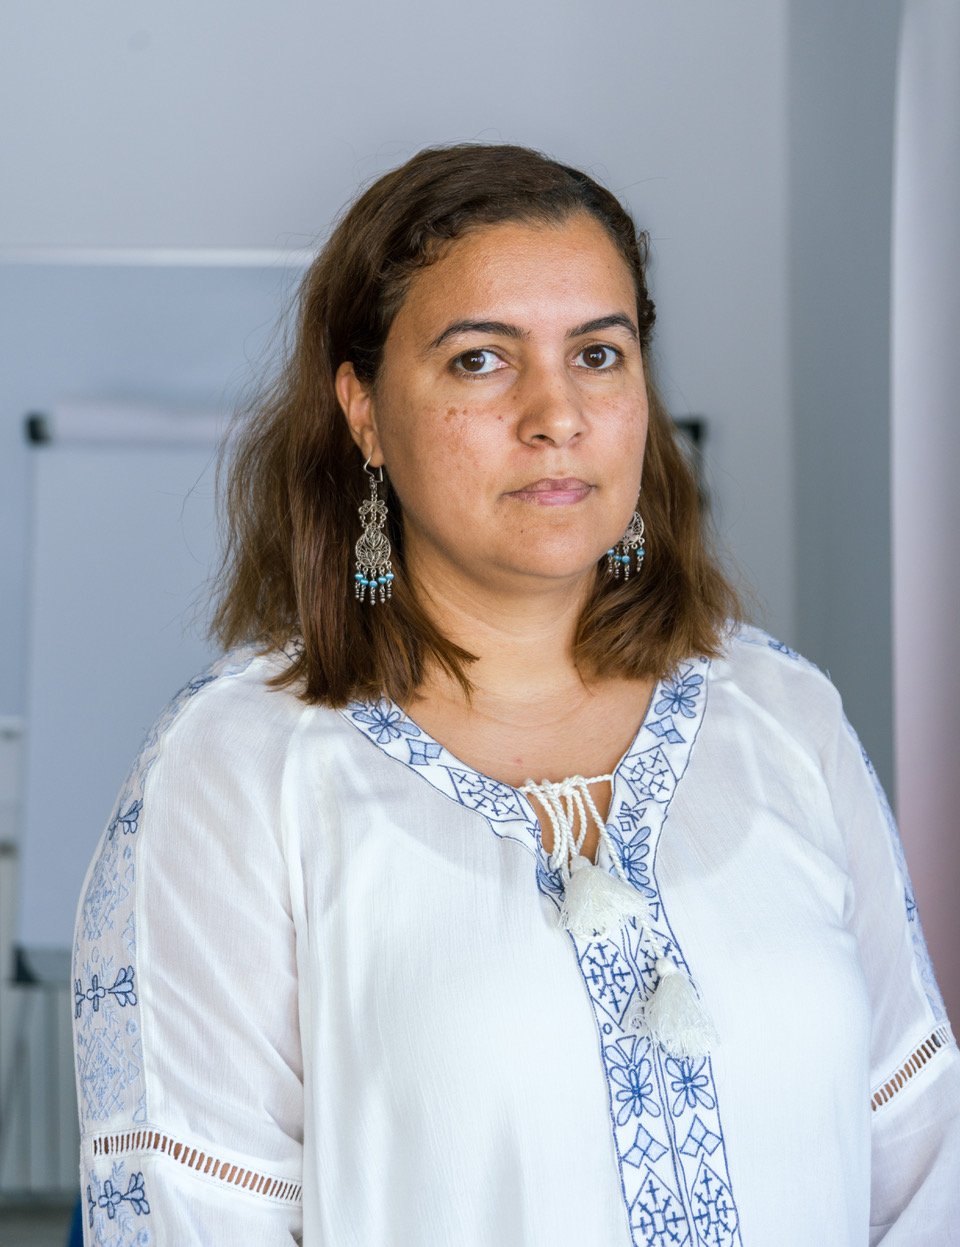 Salwa El Gantri is the head of the Tunisian office of the International Center for Transitional Justice